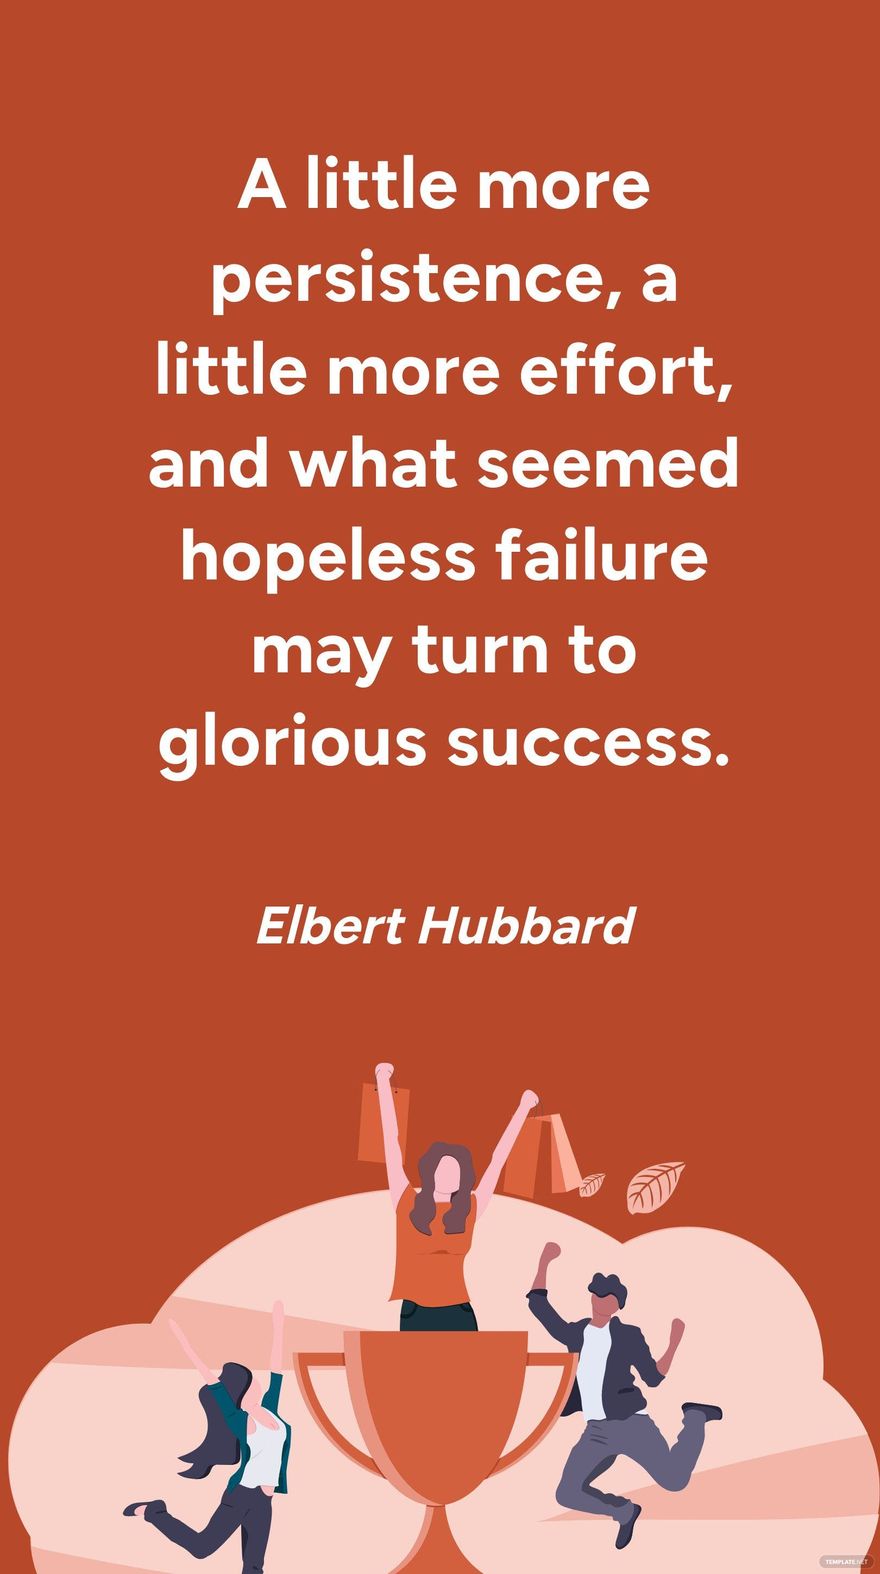 Elbert Hubbard - A little more persistence, a little more effort, and what seemed hopeless failure may turn to glorious success.